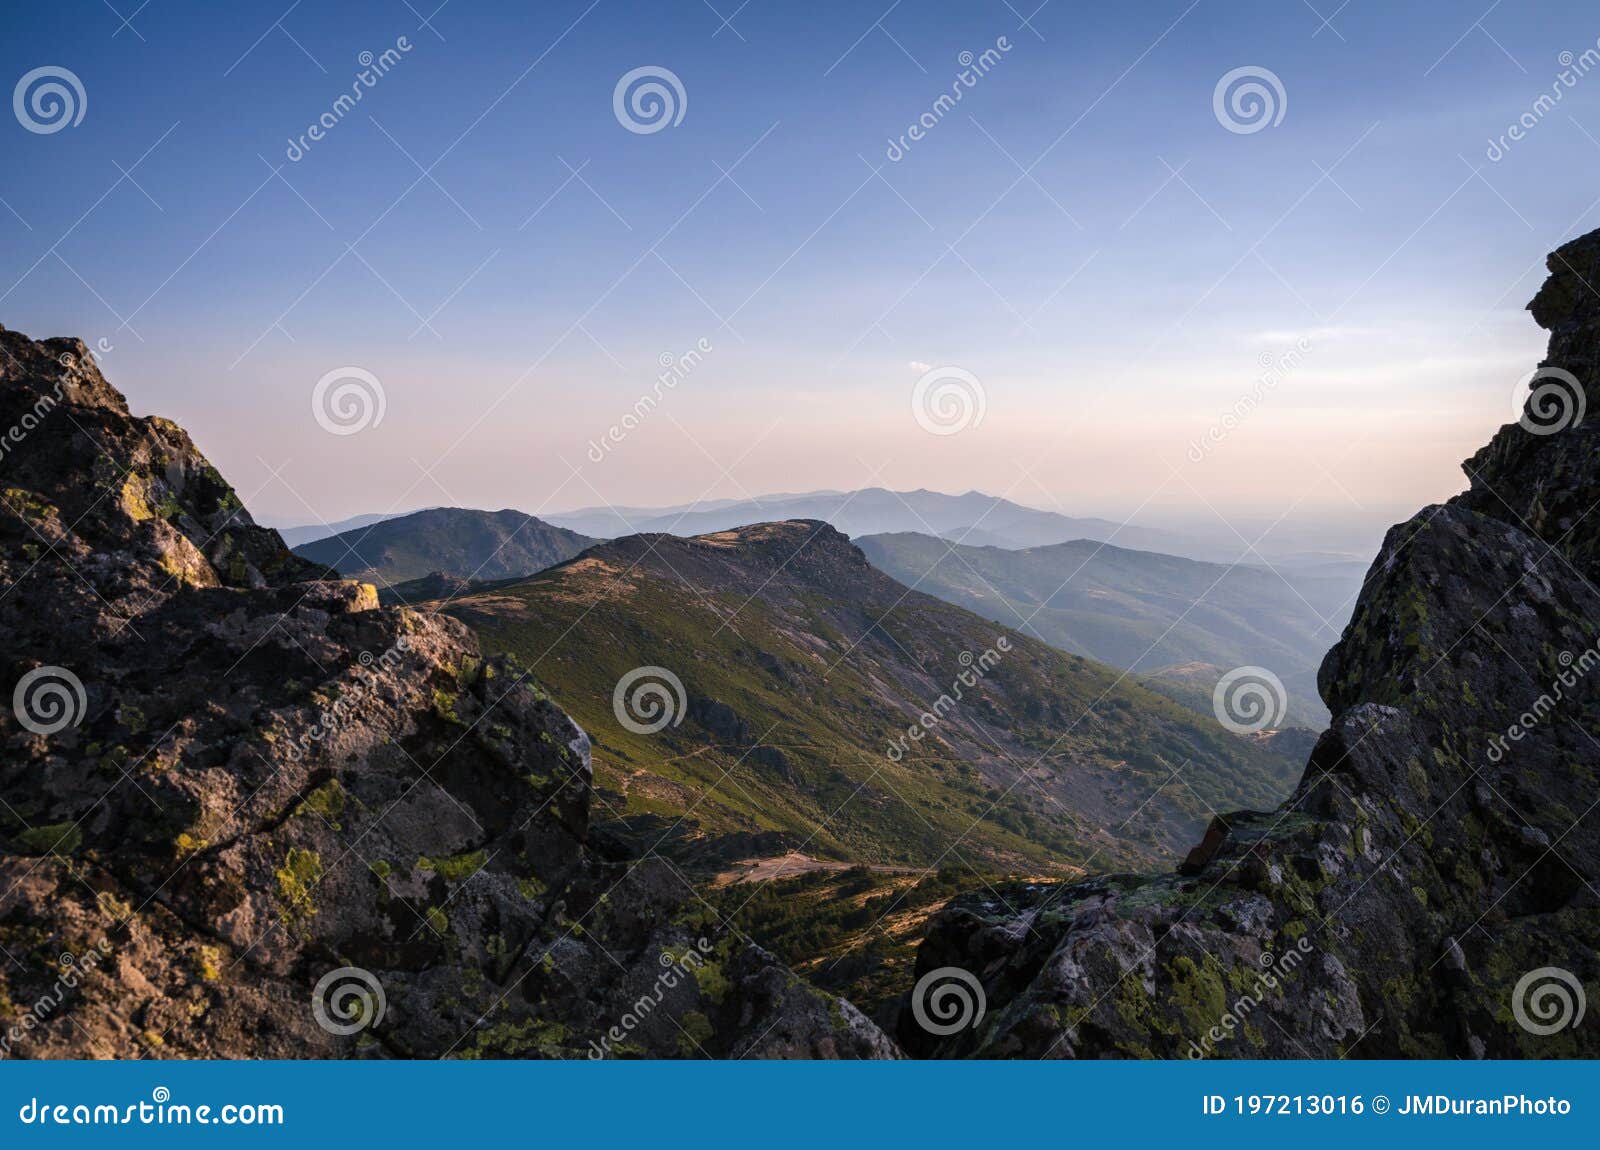 mountain landscape at sunset with the haze covering the valley, sierra de francia, salamanca, spain